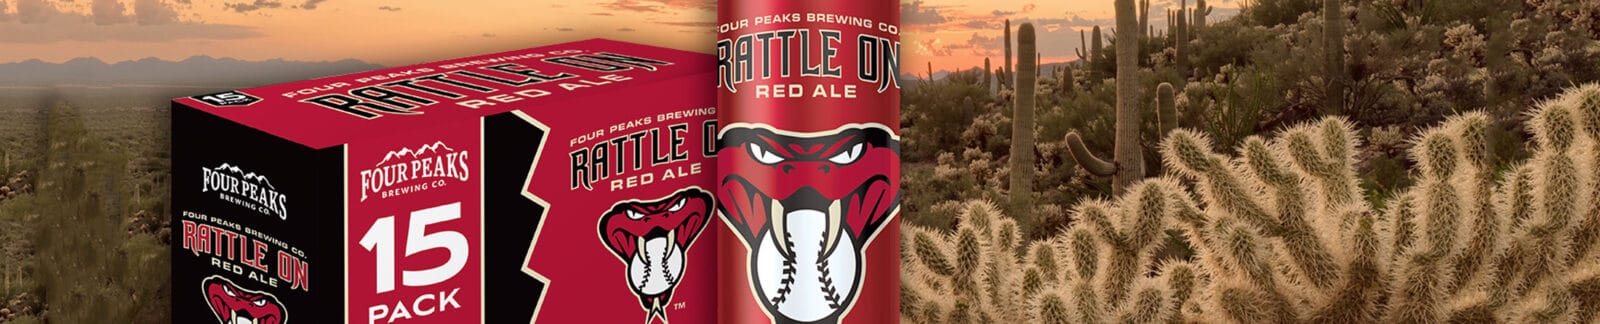 Rattle On Red Ale by Four Peaks Brewing header